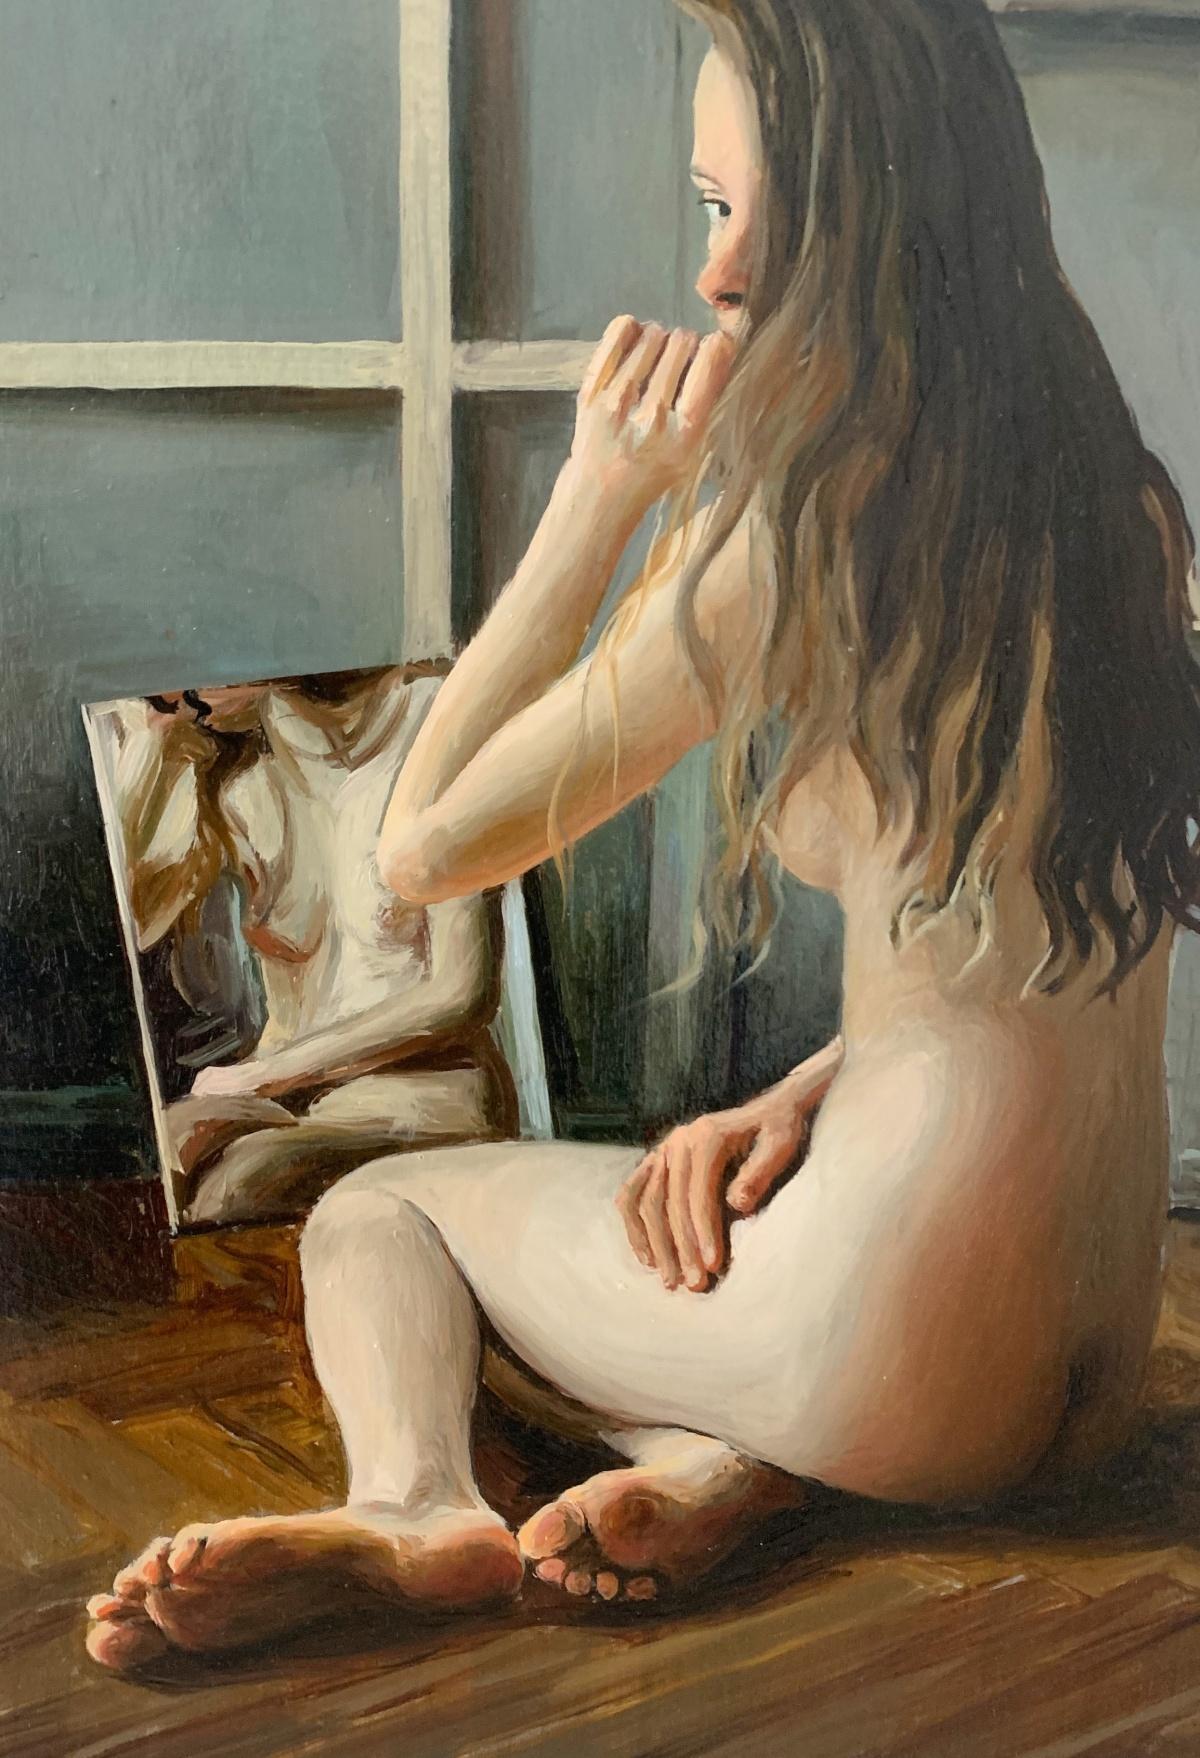 Gazing - Realistic oil painting, Nude, Young Polish artist - Painting by Agnieszka Staak-Janczarska